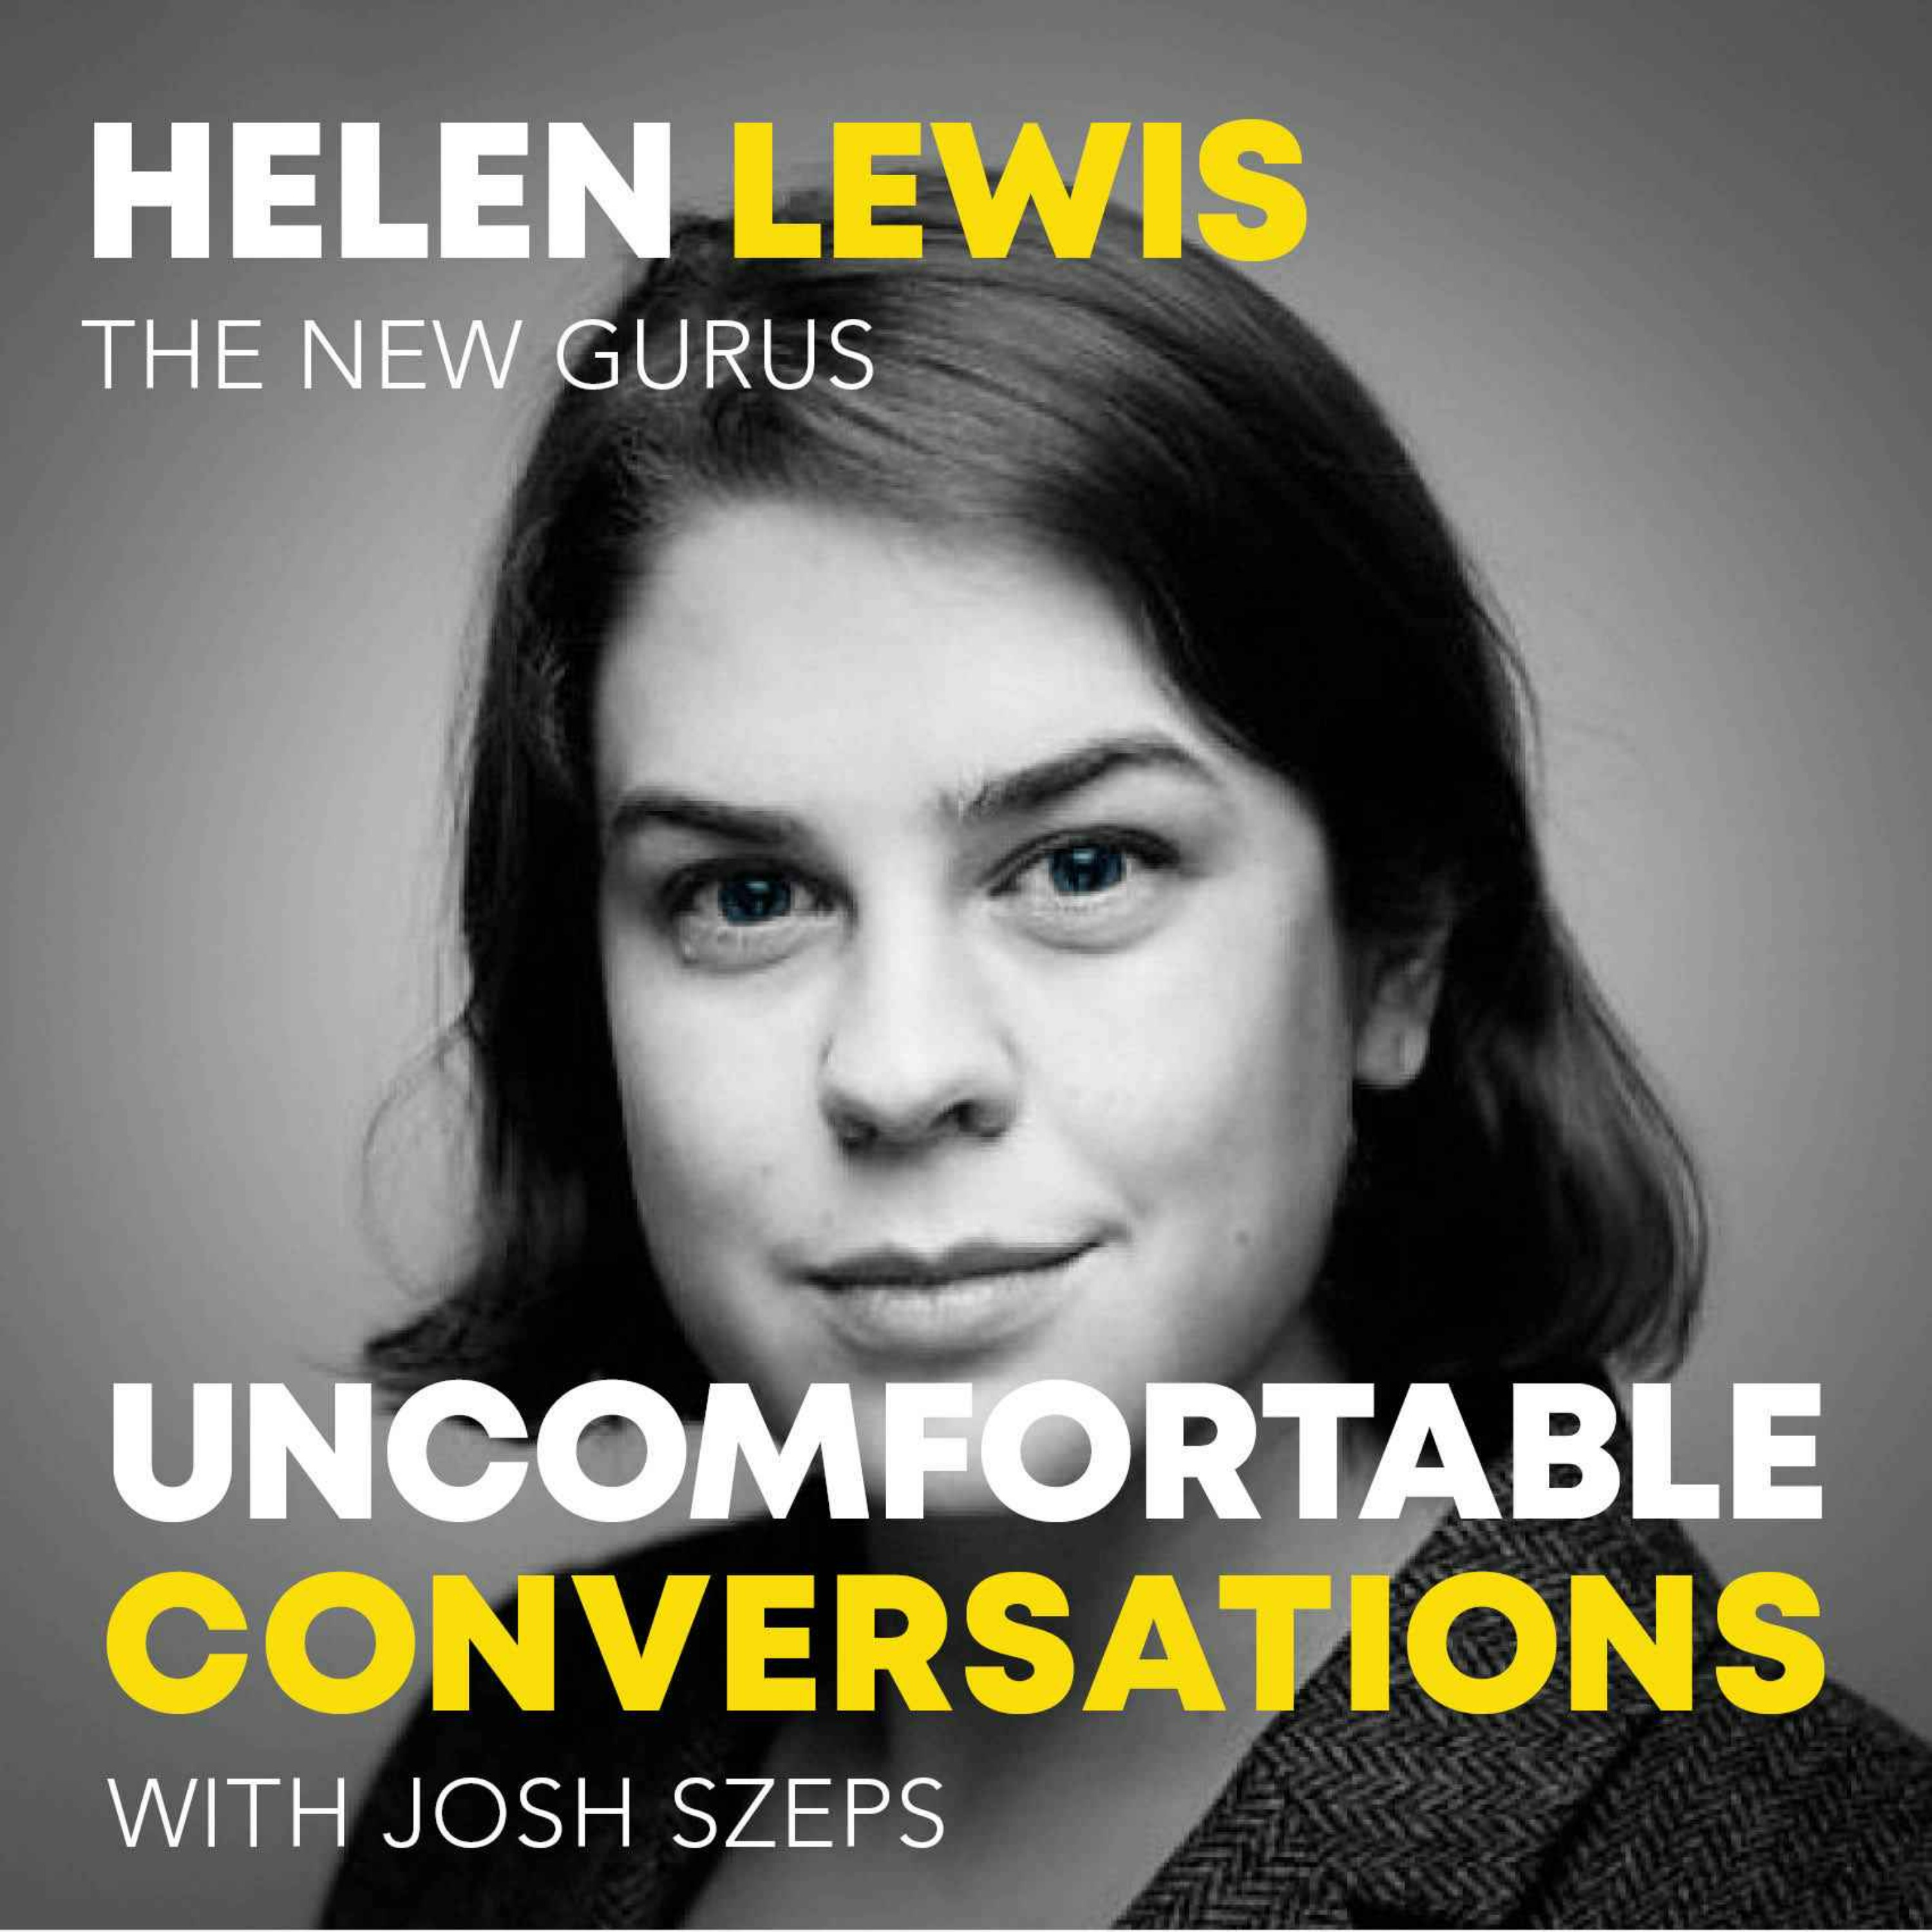 "The New Gurus" with Helen Lewis